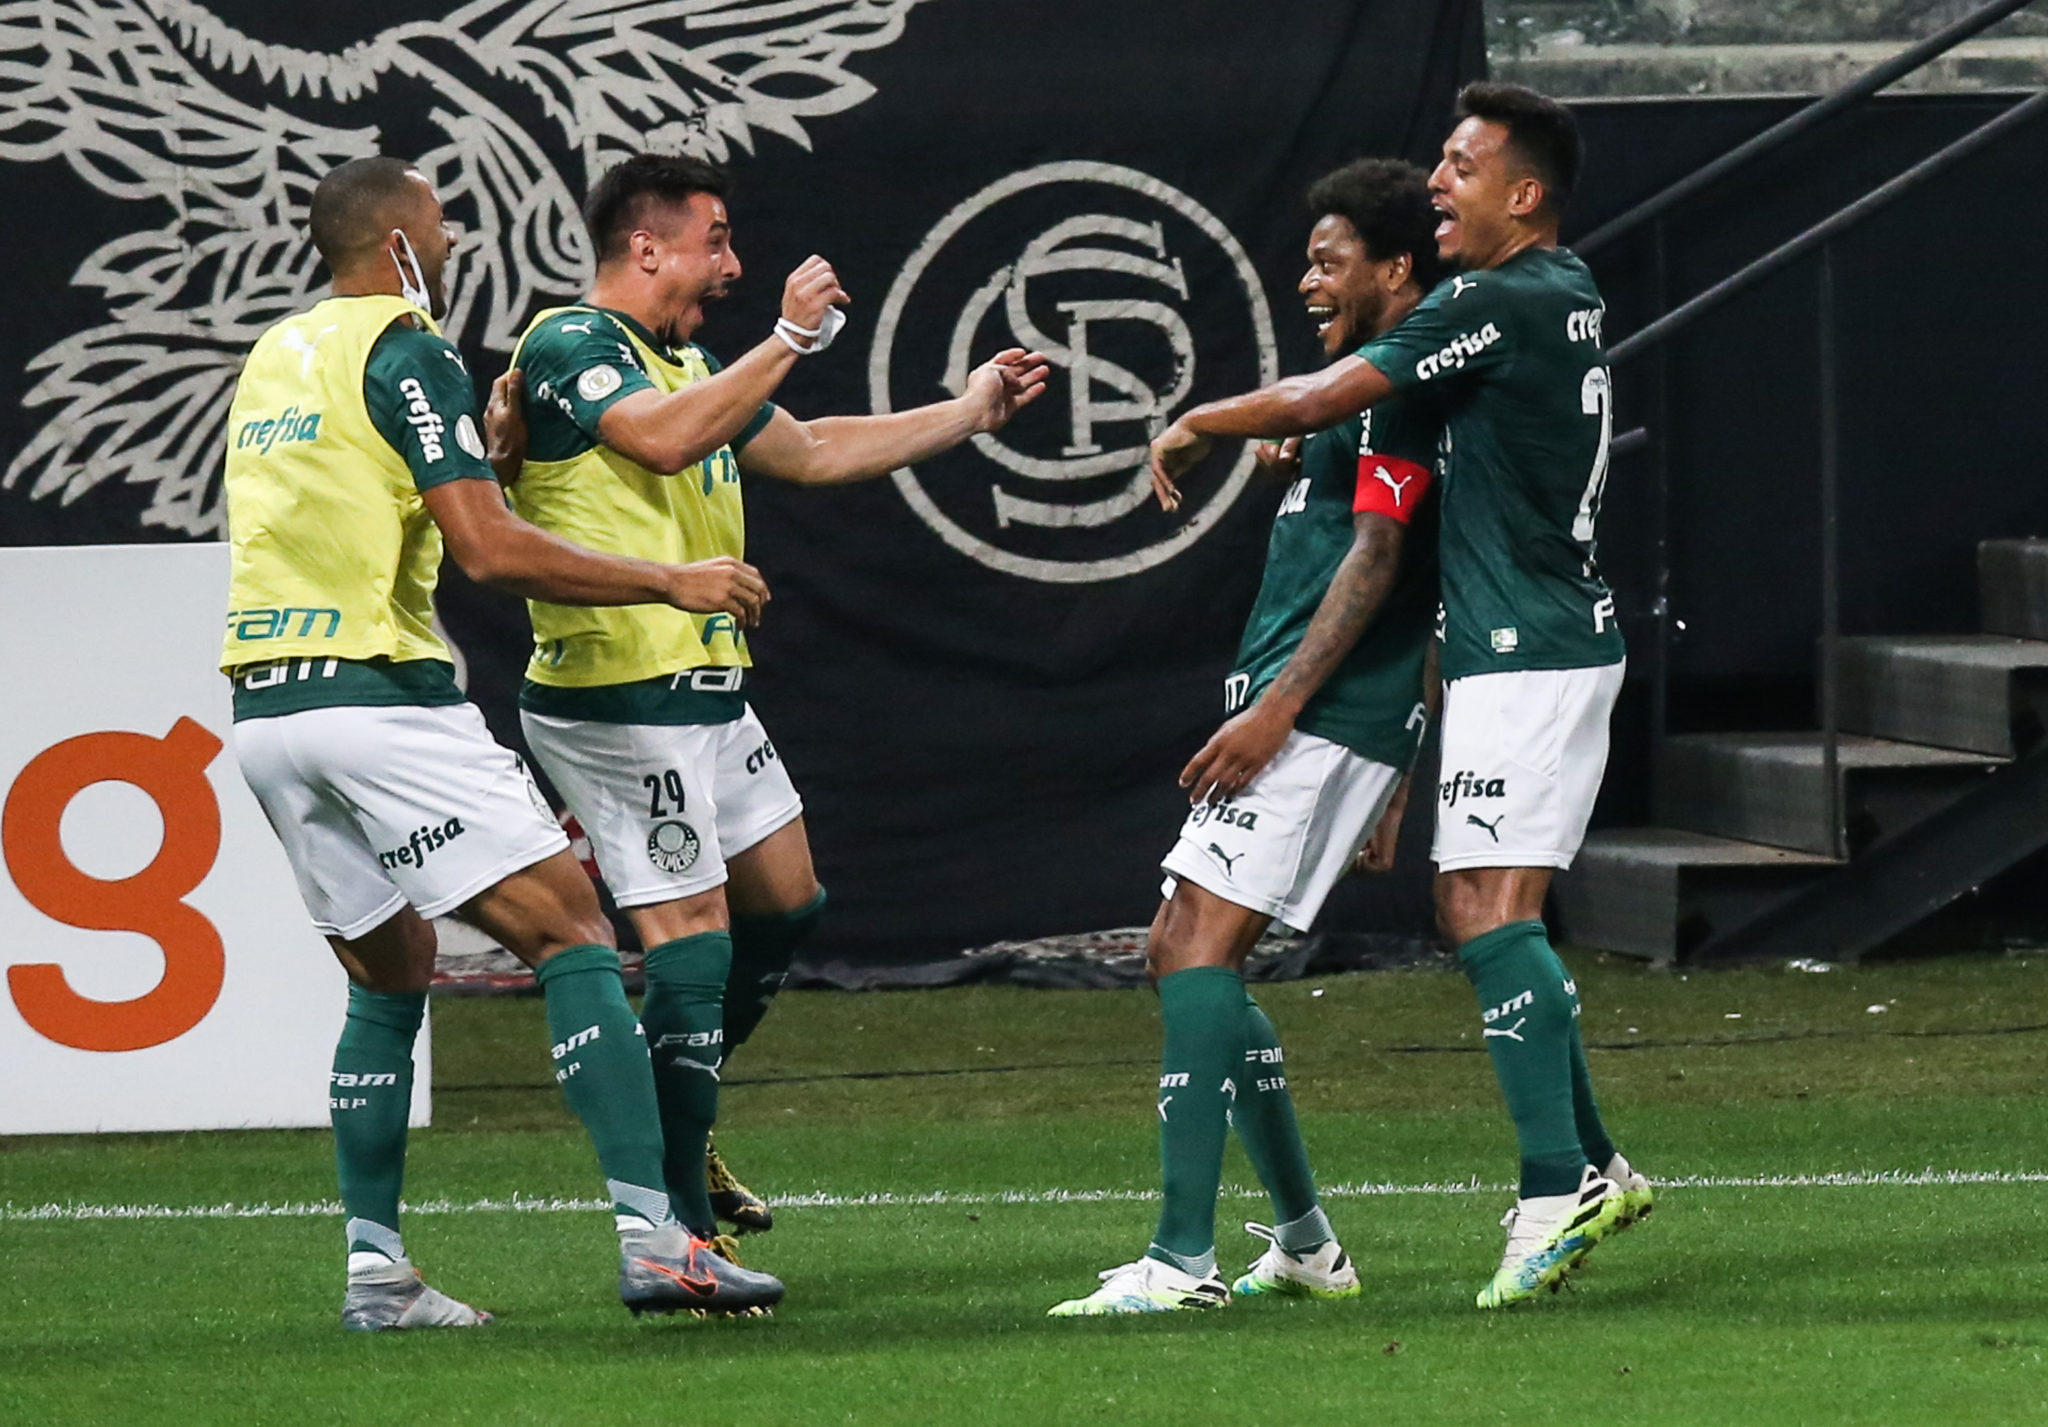 SAO PAULO, BRAZIL - SEPTEMBER 10: Luiz Adriano #10 of Palmeiras celebrates with his teammates after scoring the first goal of their team during the match against Corinthians as part of Brasileirao Series A at Neo Quimica Arena on September 10, 2020 in Sao Paulo, Brazil. The match is played behind closed doors and with precautionary measures against the spread of coronavirus (COVID-19). (Photo by Alexandre Schneider/Getty Images)